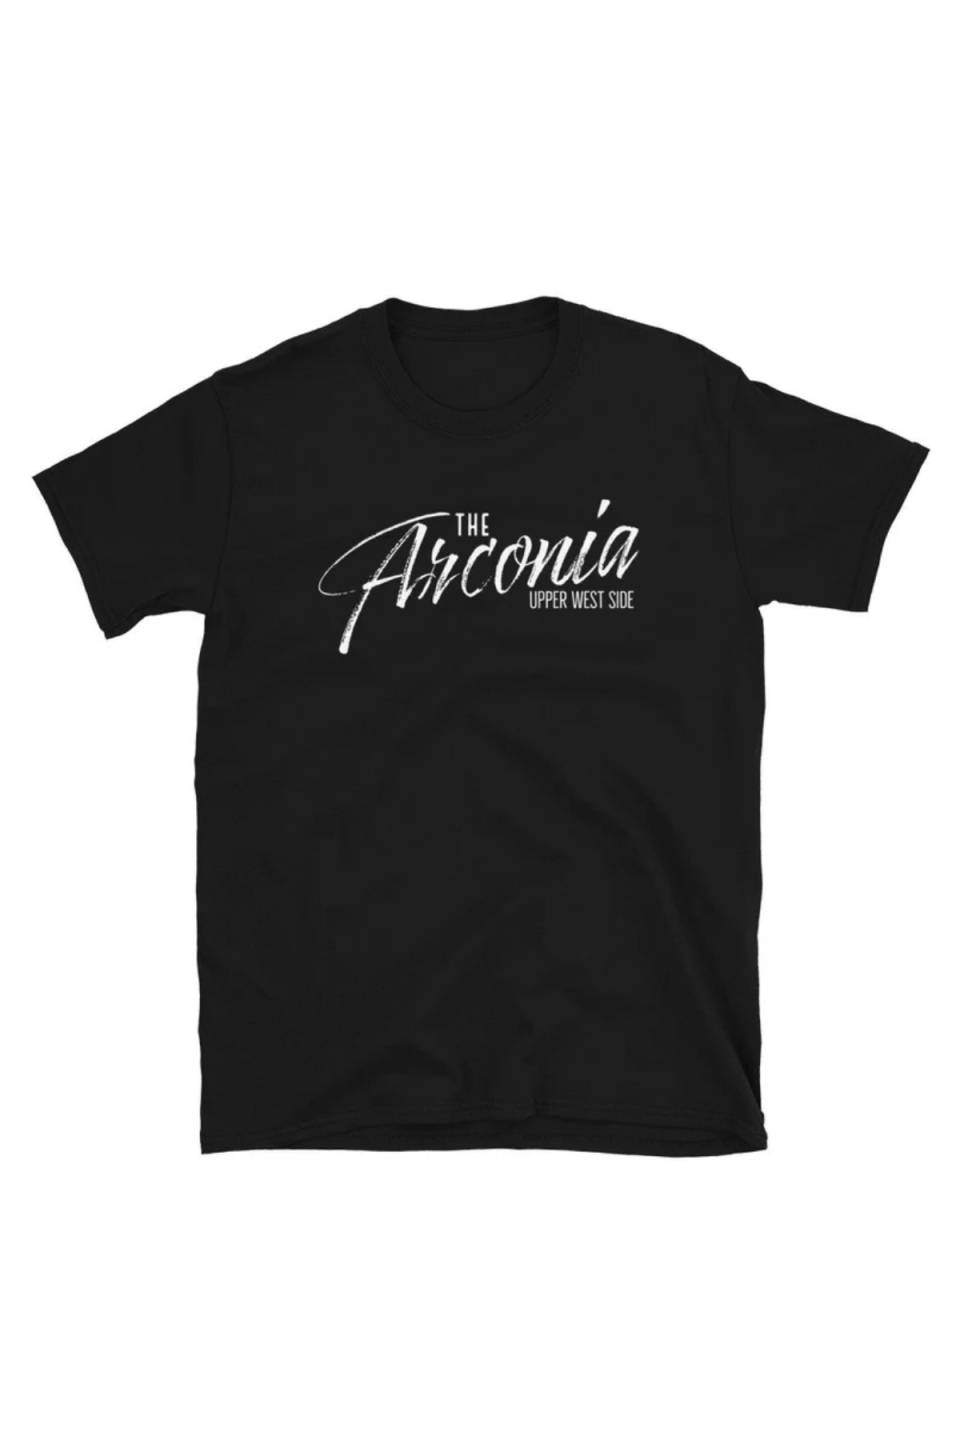 9) The Arconia Upper West Side T-Shirt